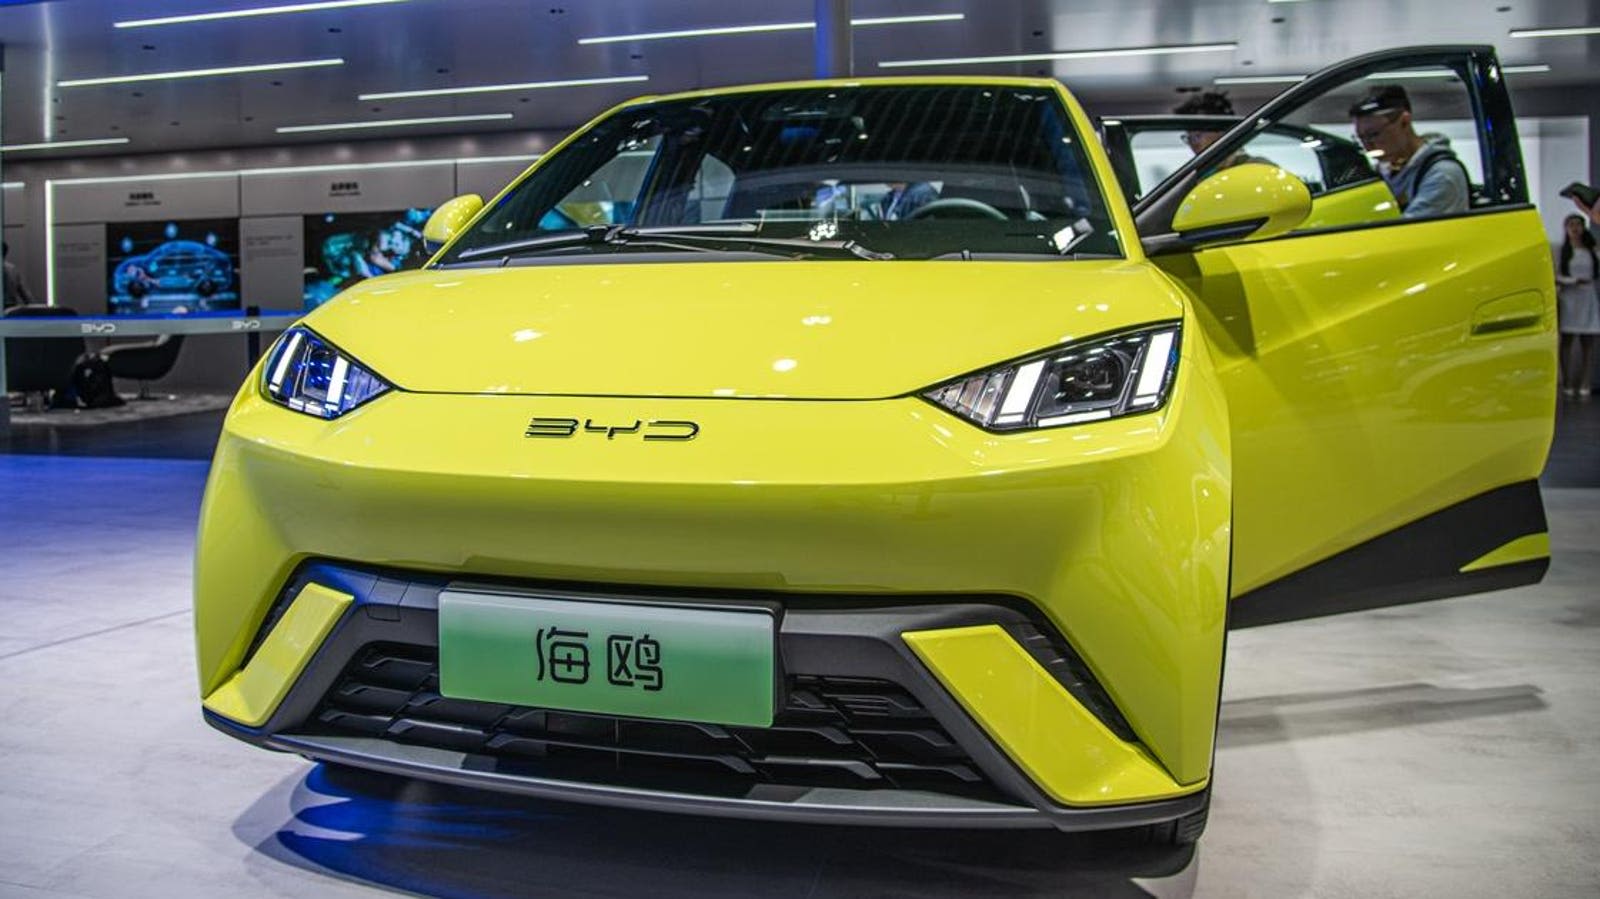 China’s Seagull Leads The Way In Cheap, Well-Made Electric Cars